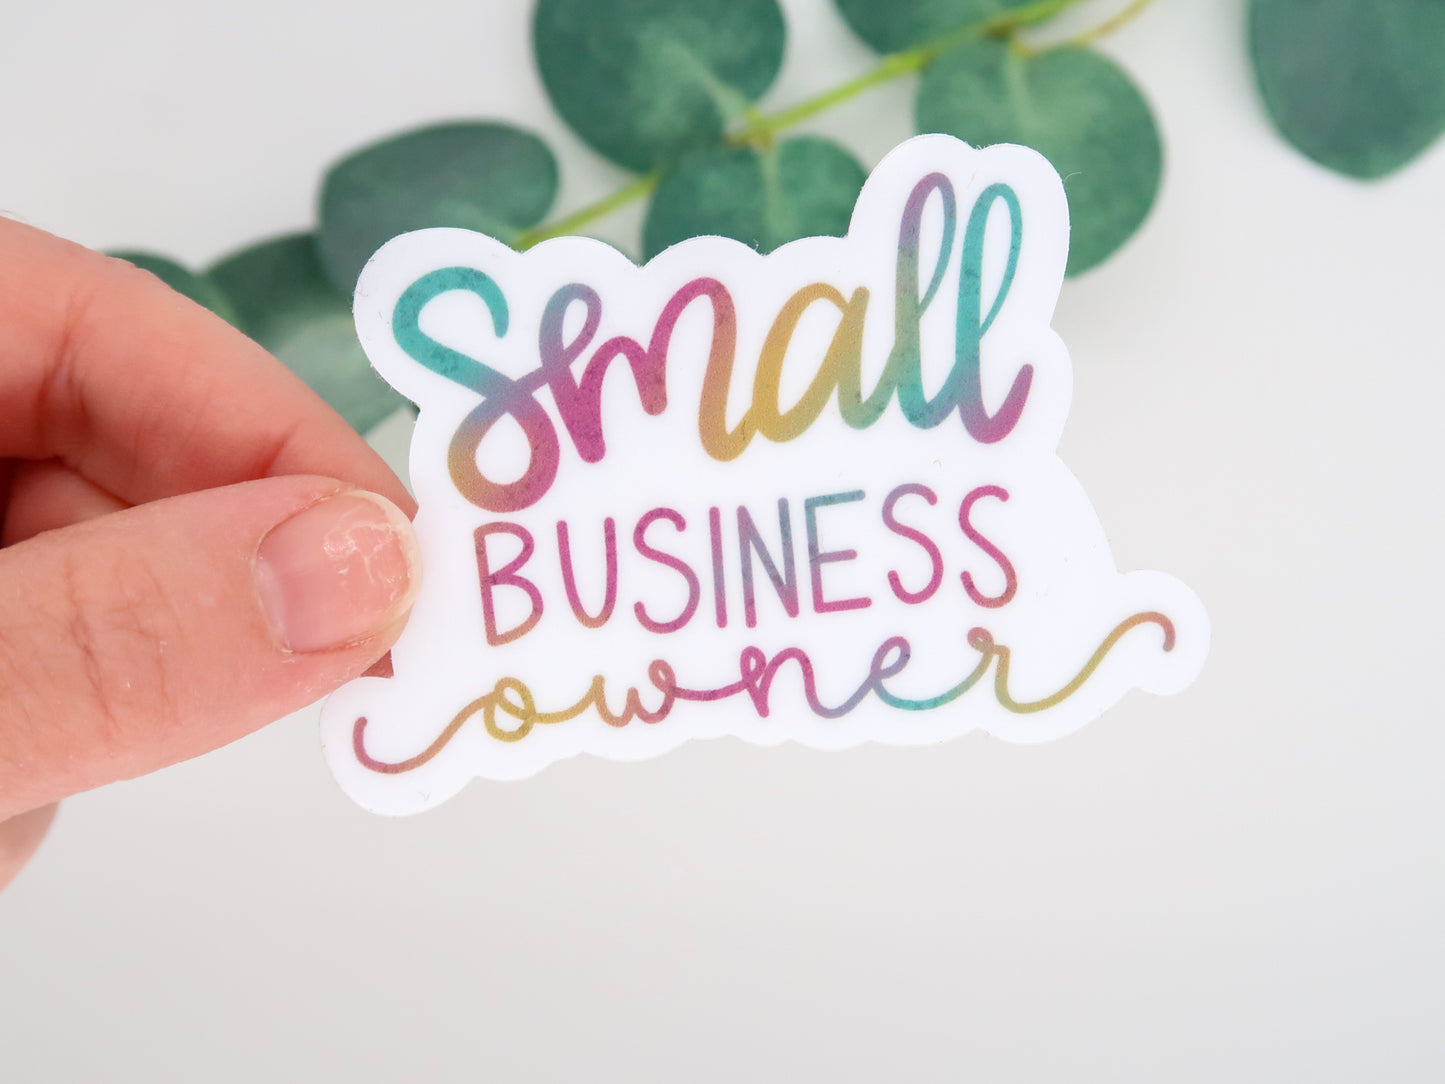 Small Business Owner Waterproof Sticker